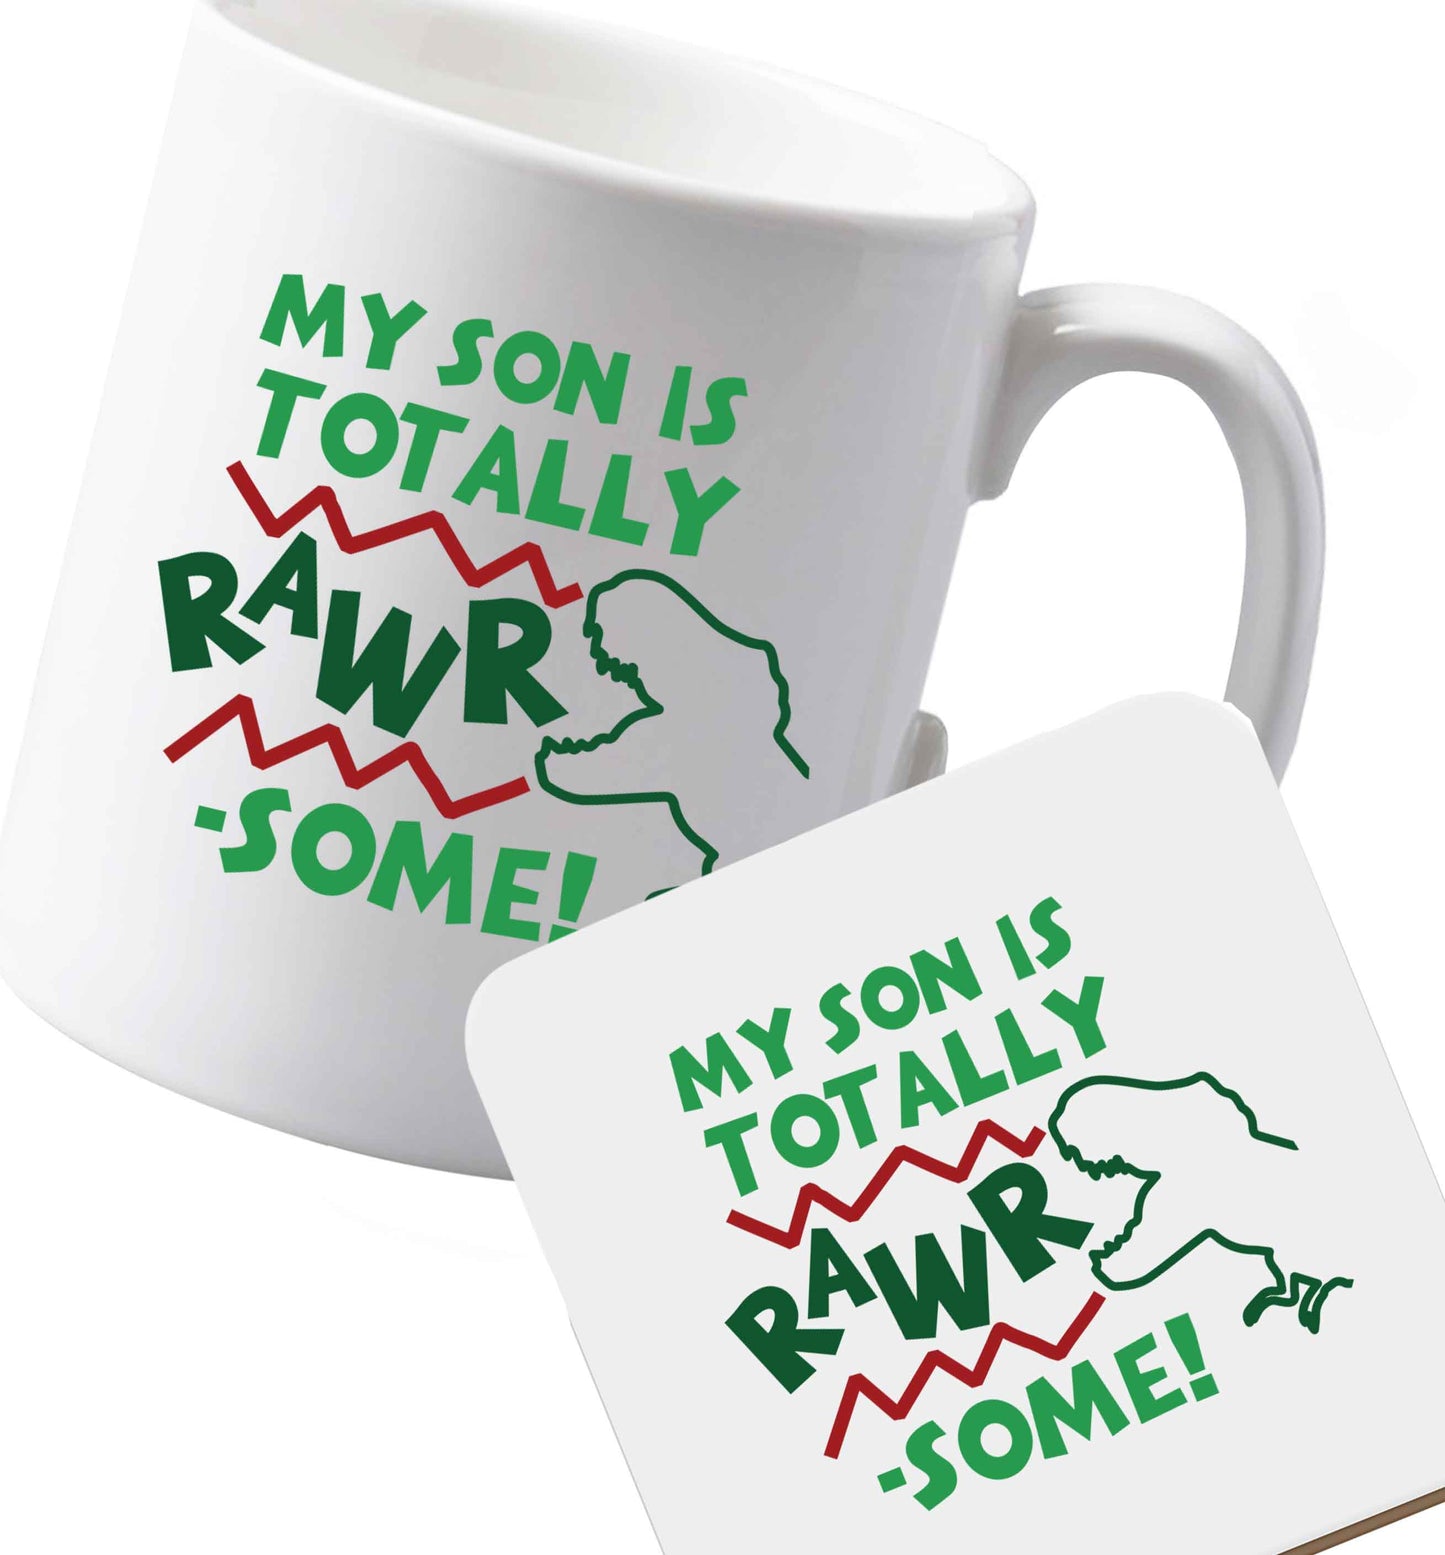 10 oz Ceramic mug and coaster My son is totally rawrsome both sides